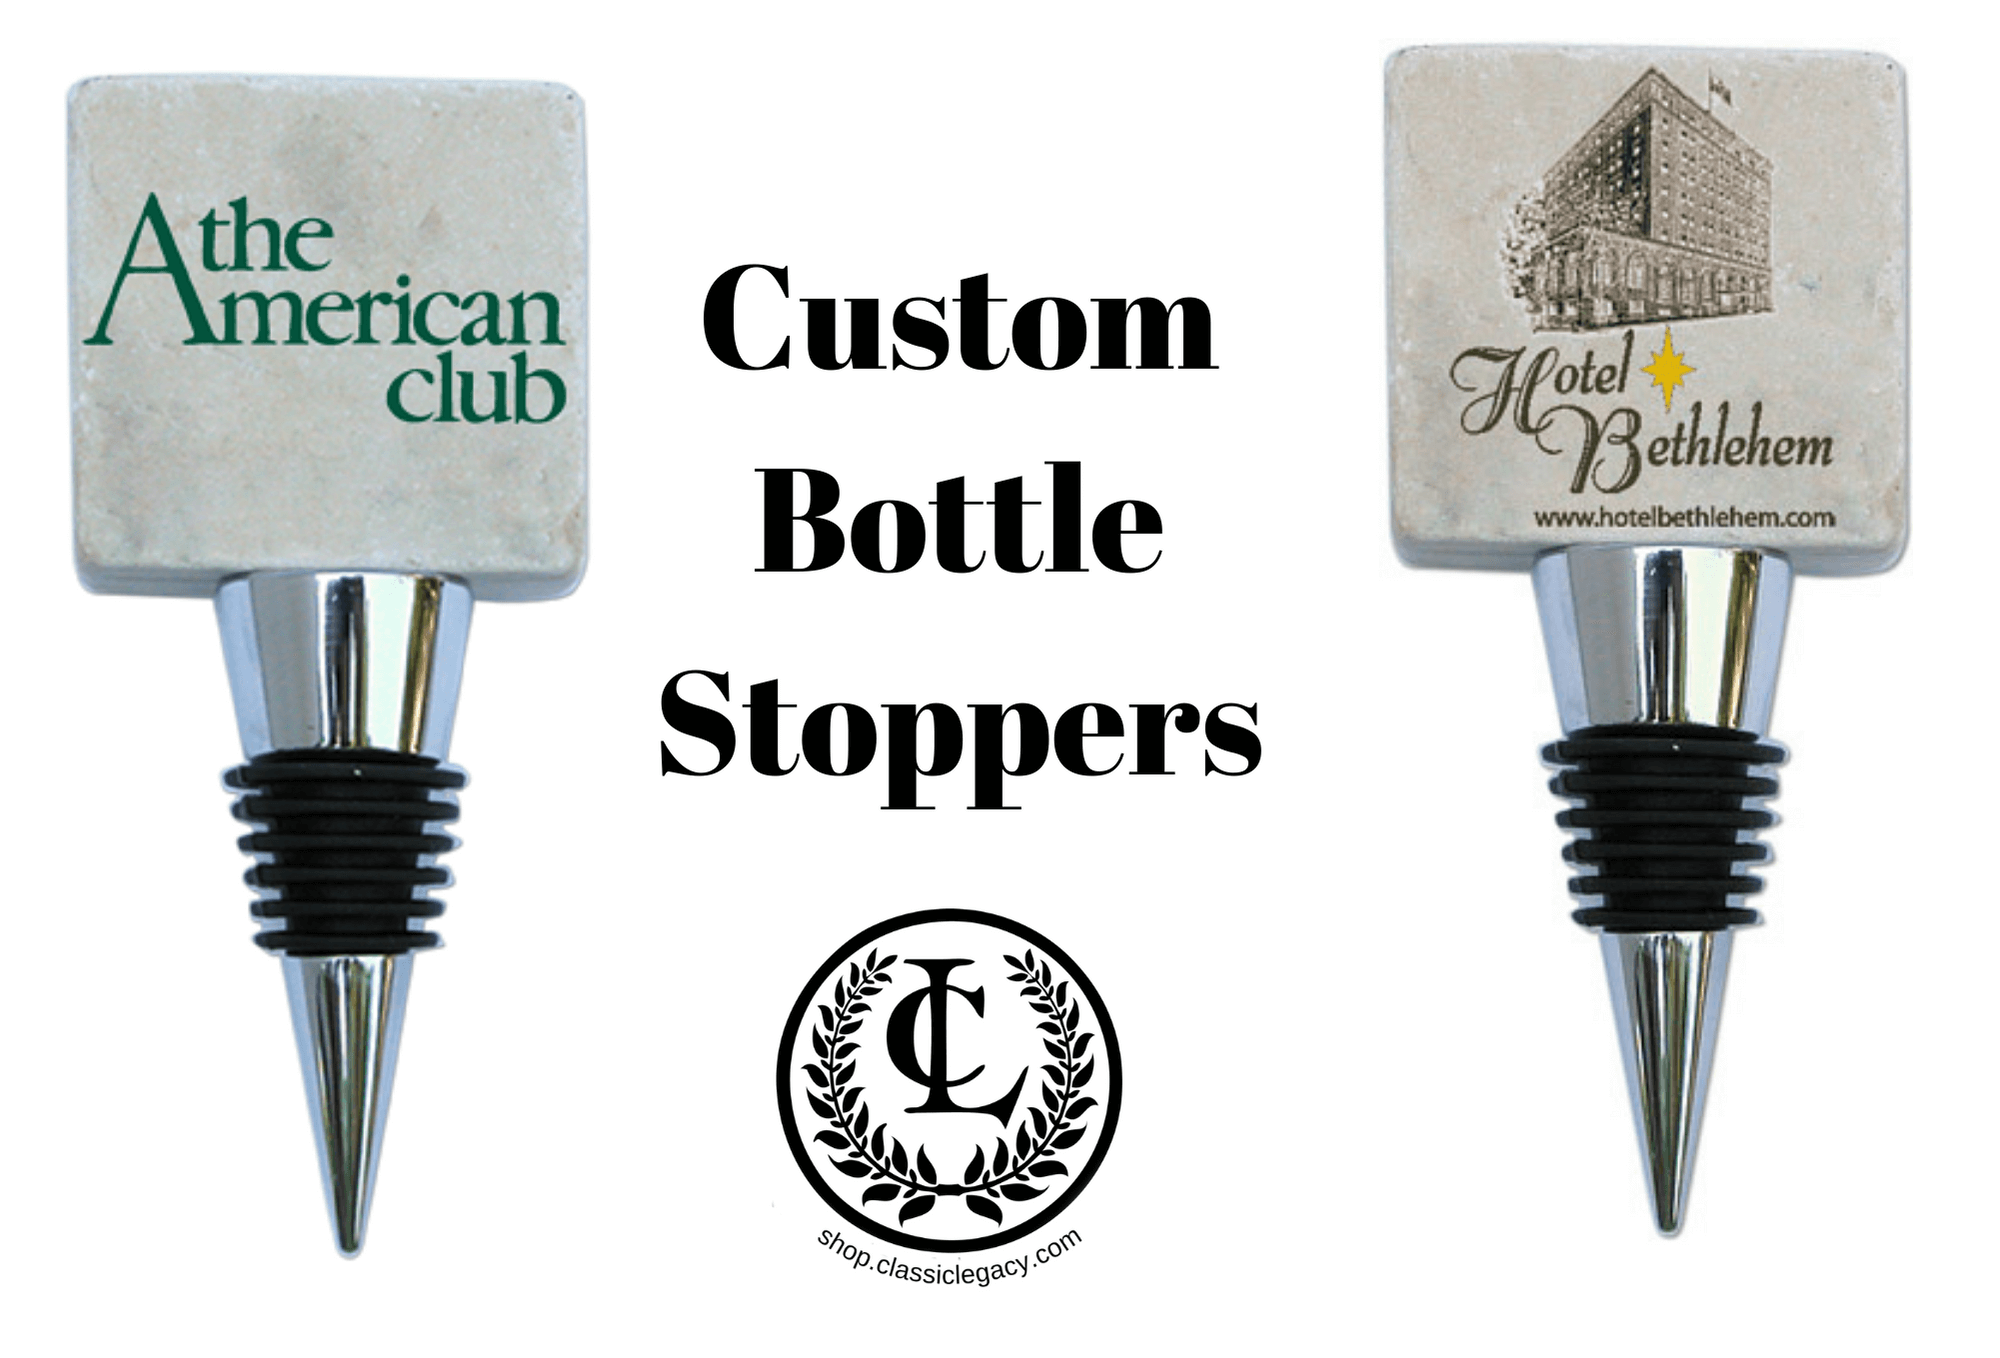 Custom marble bottle stoppers with logo of The American Club and the logo of Hotel Bethlehem.